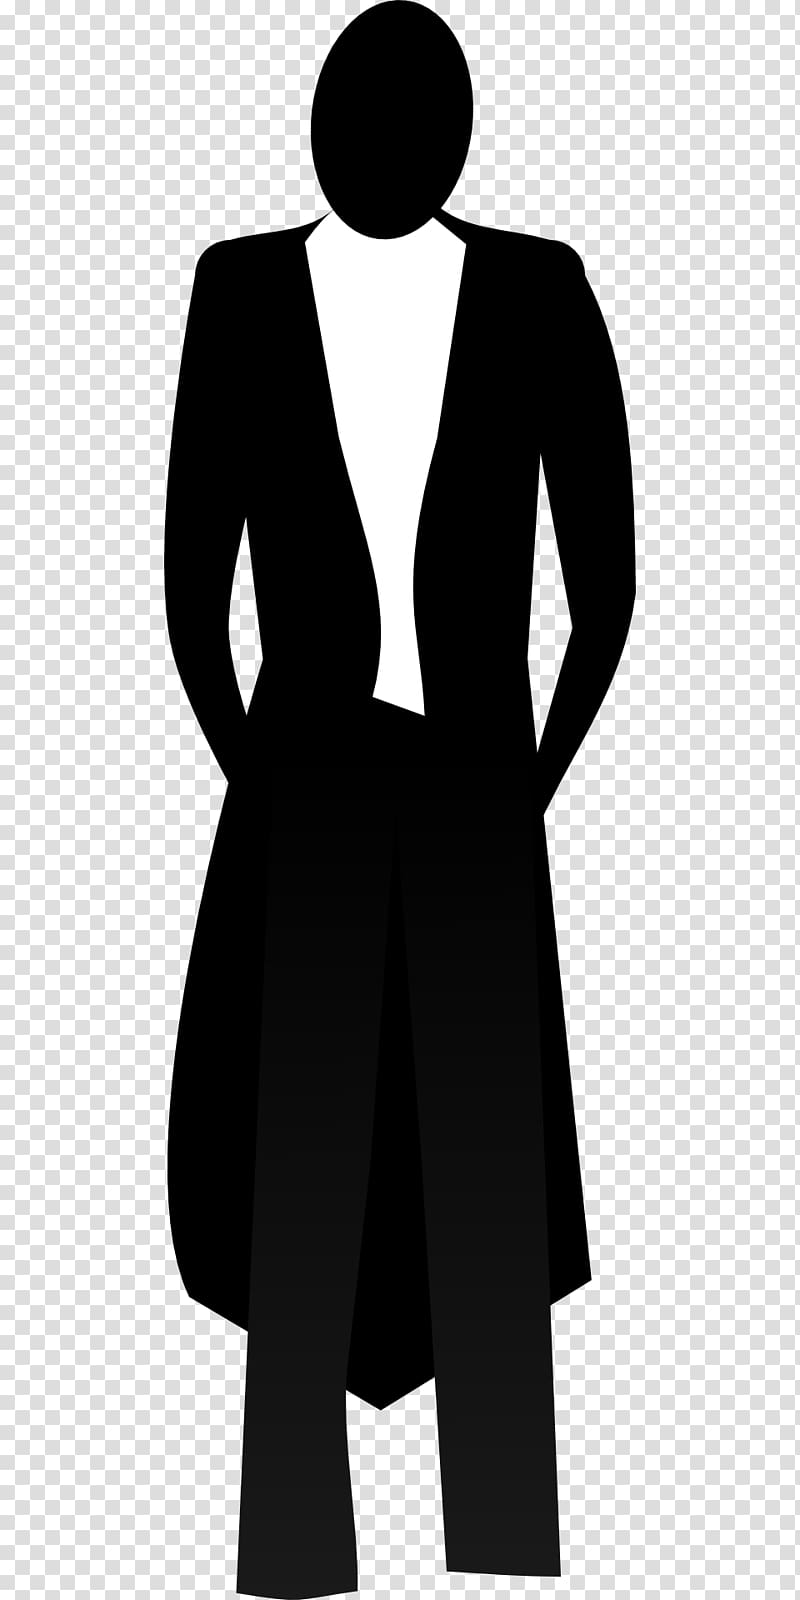 Tuxedo Suit Formal wear Clothing Bridegroom, groom transparent background PNG clipart